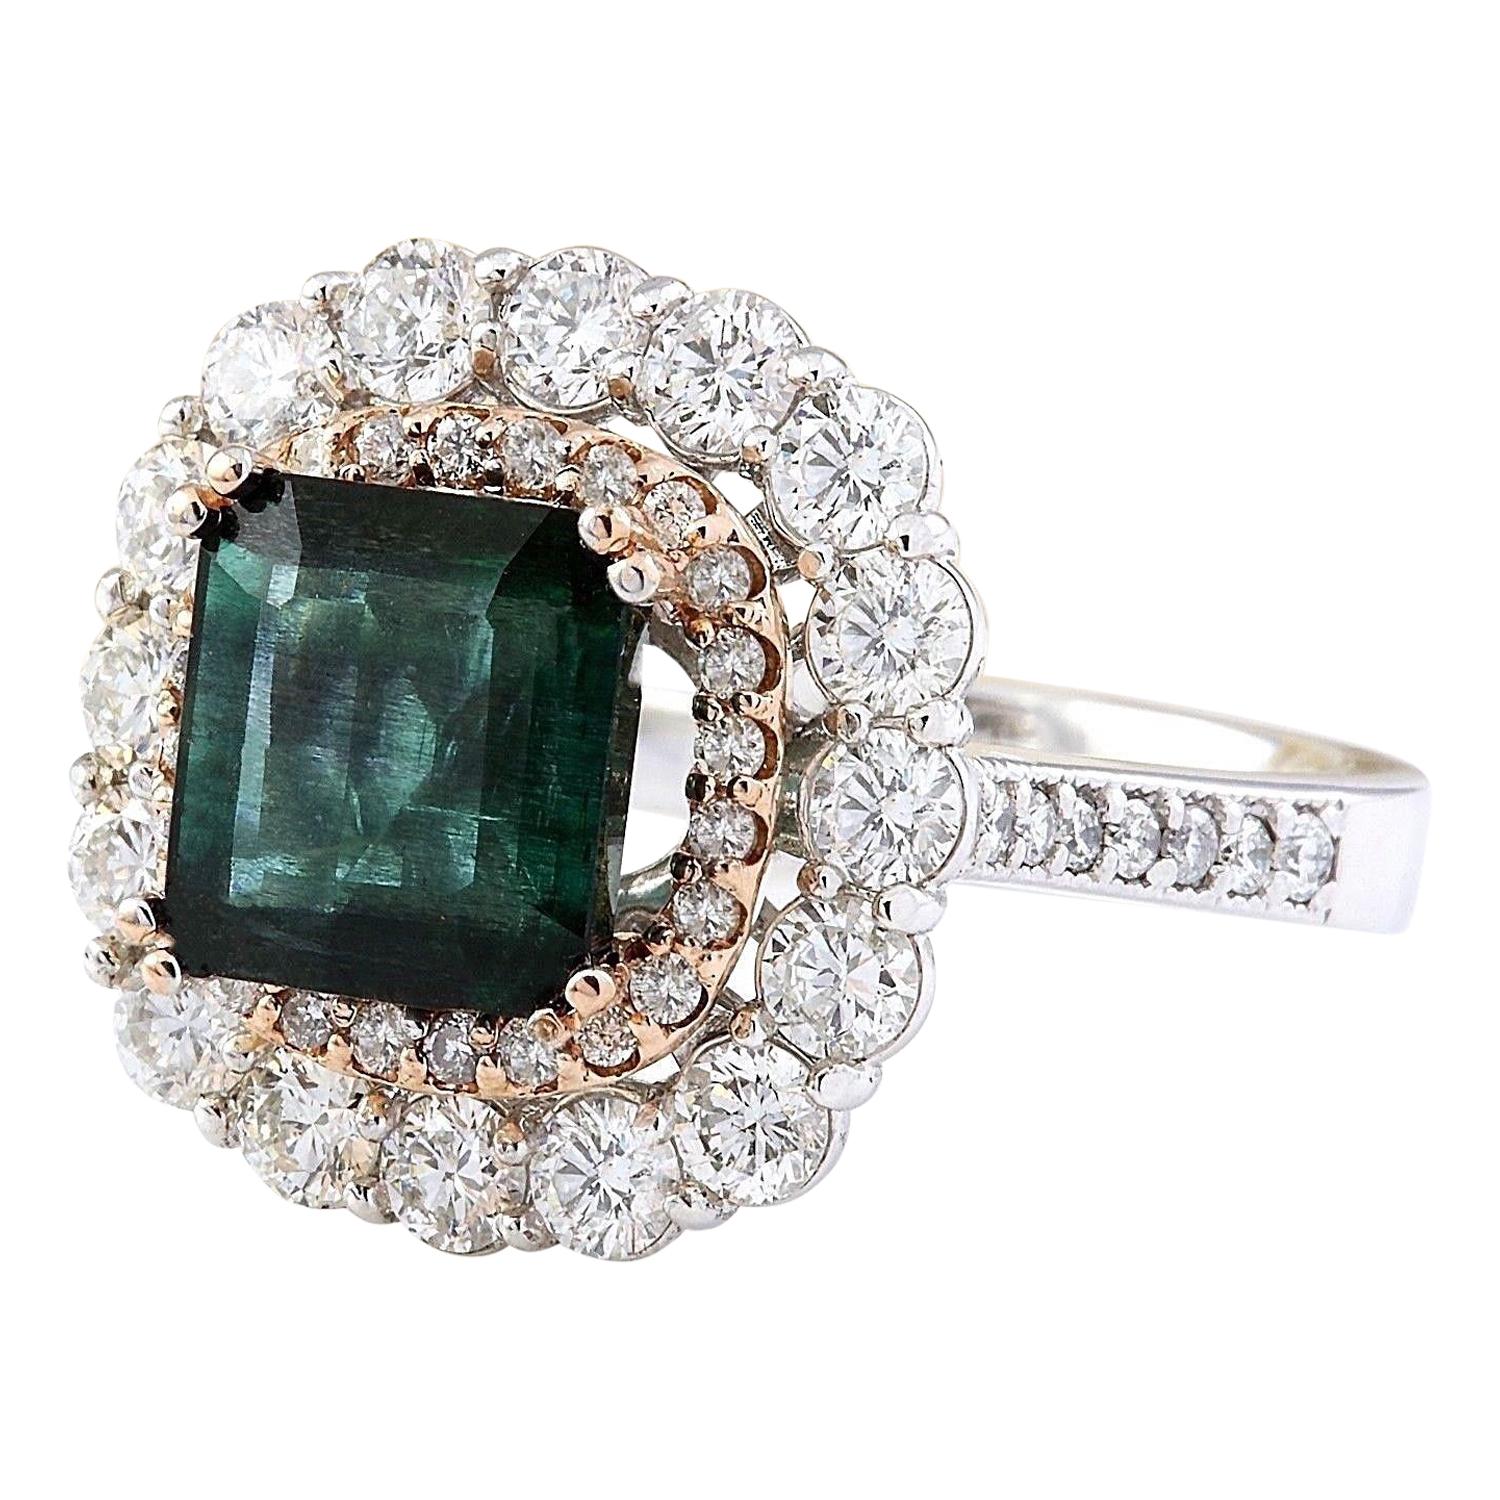 5.32 Carat Natural Emerald 14K Solid Two Tone Gold Diamond Ring
 Item Type: Ring
 Item Style: Engagement
 Material: 14K Two Tone Gold
 Mainstone: Emerald
 Stone Color: Green
 Stone Weight: 4.02 Carat
 Stone Shape: Emerald
 Stone Quantity: 1
 Stone